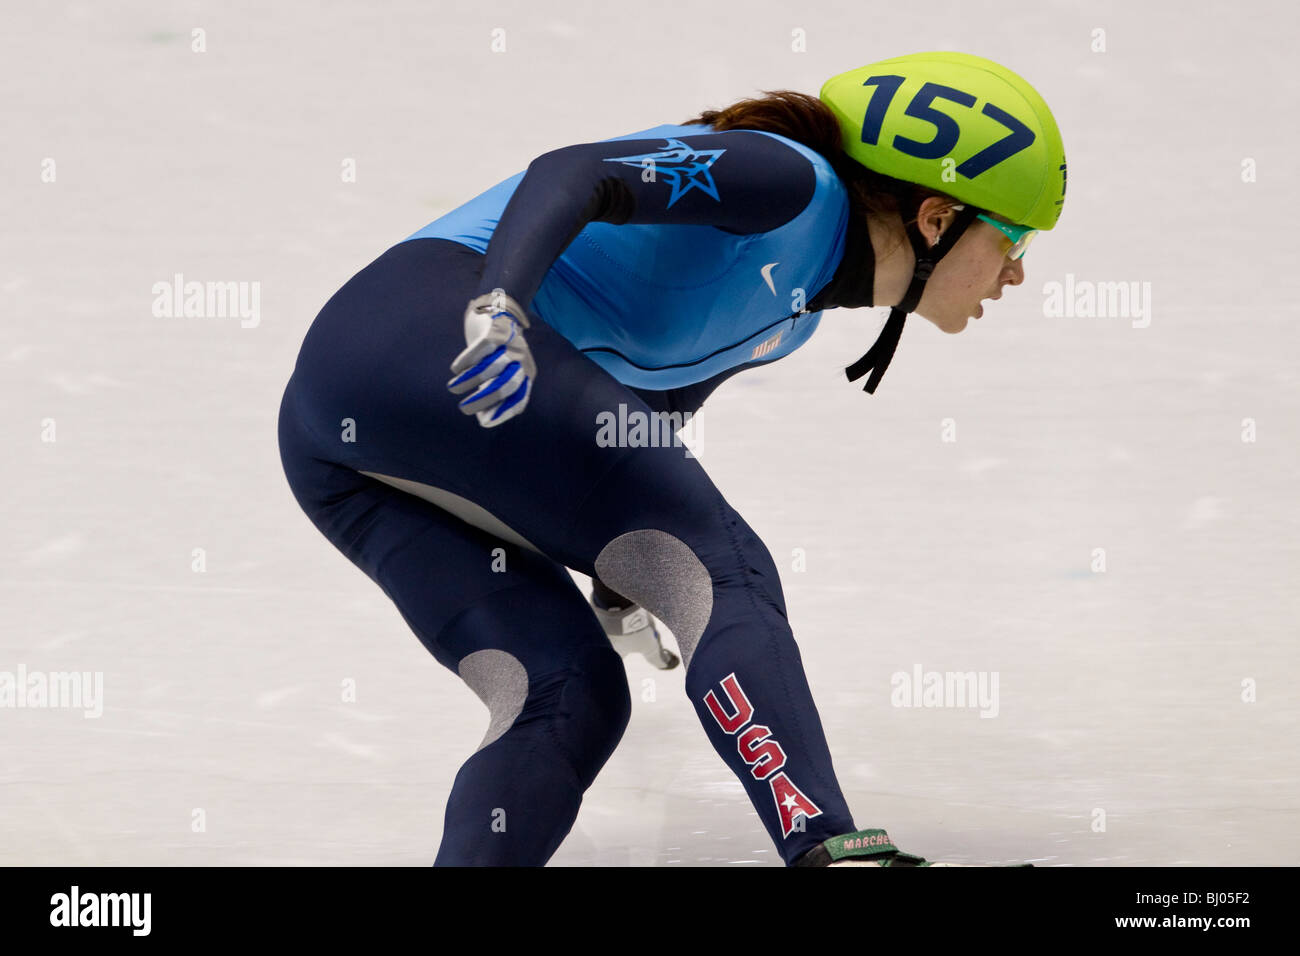 Katherine Reutter (USA) competing in the Short Track Speed Skating Women's 1000m event at the 2010 Olympic Winter Games Stock Photo